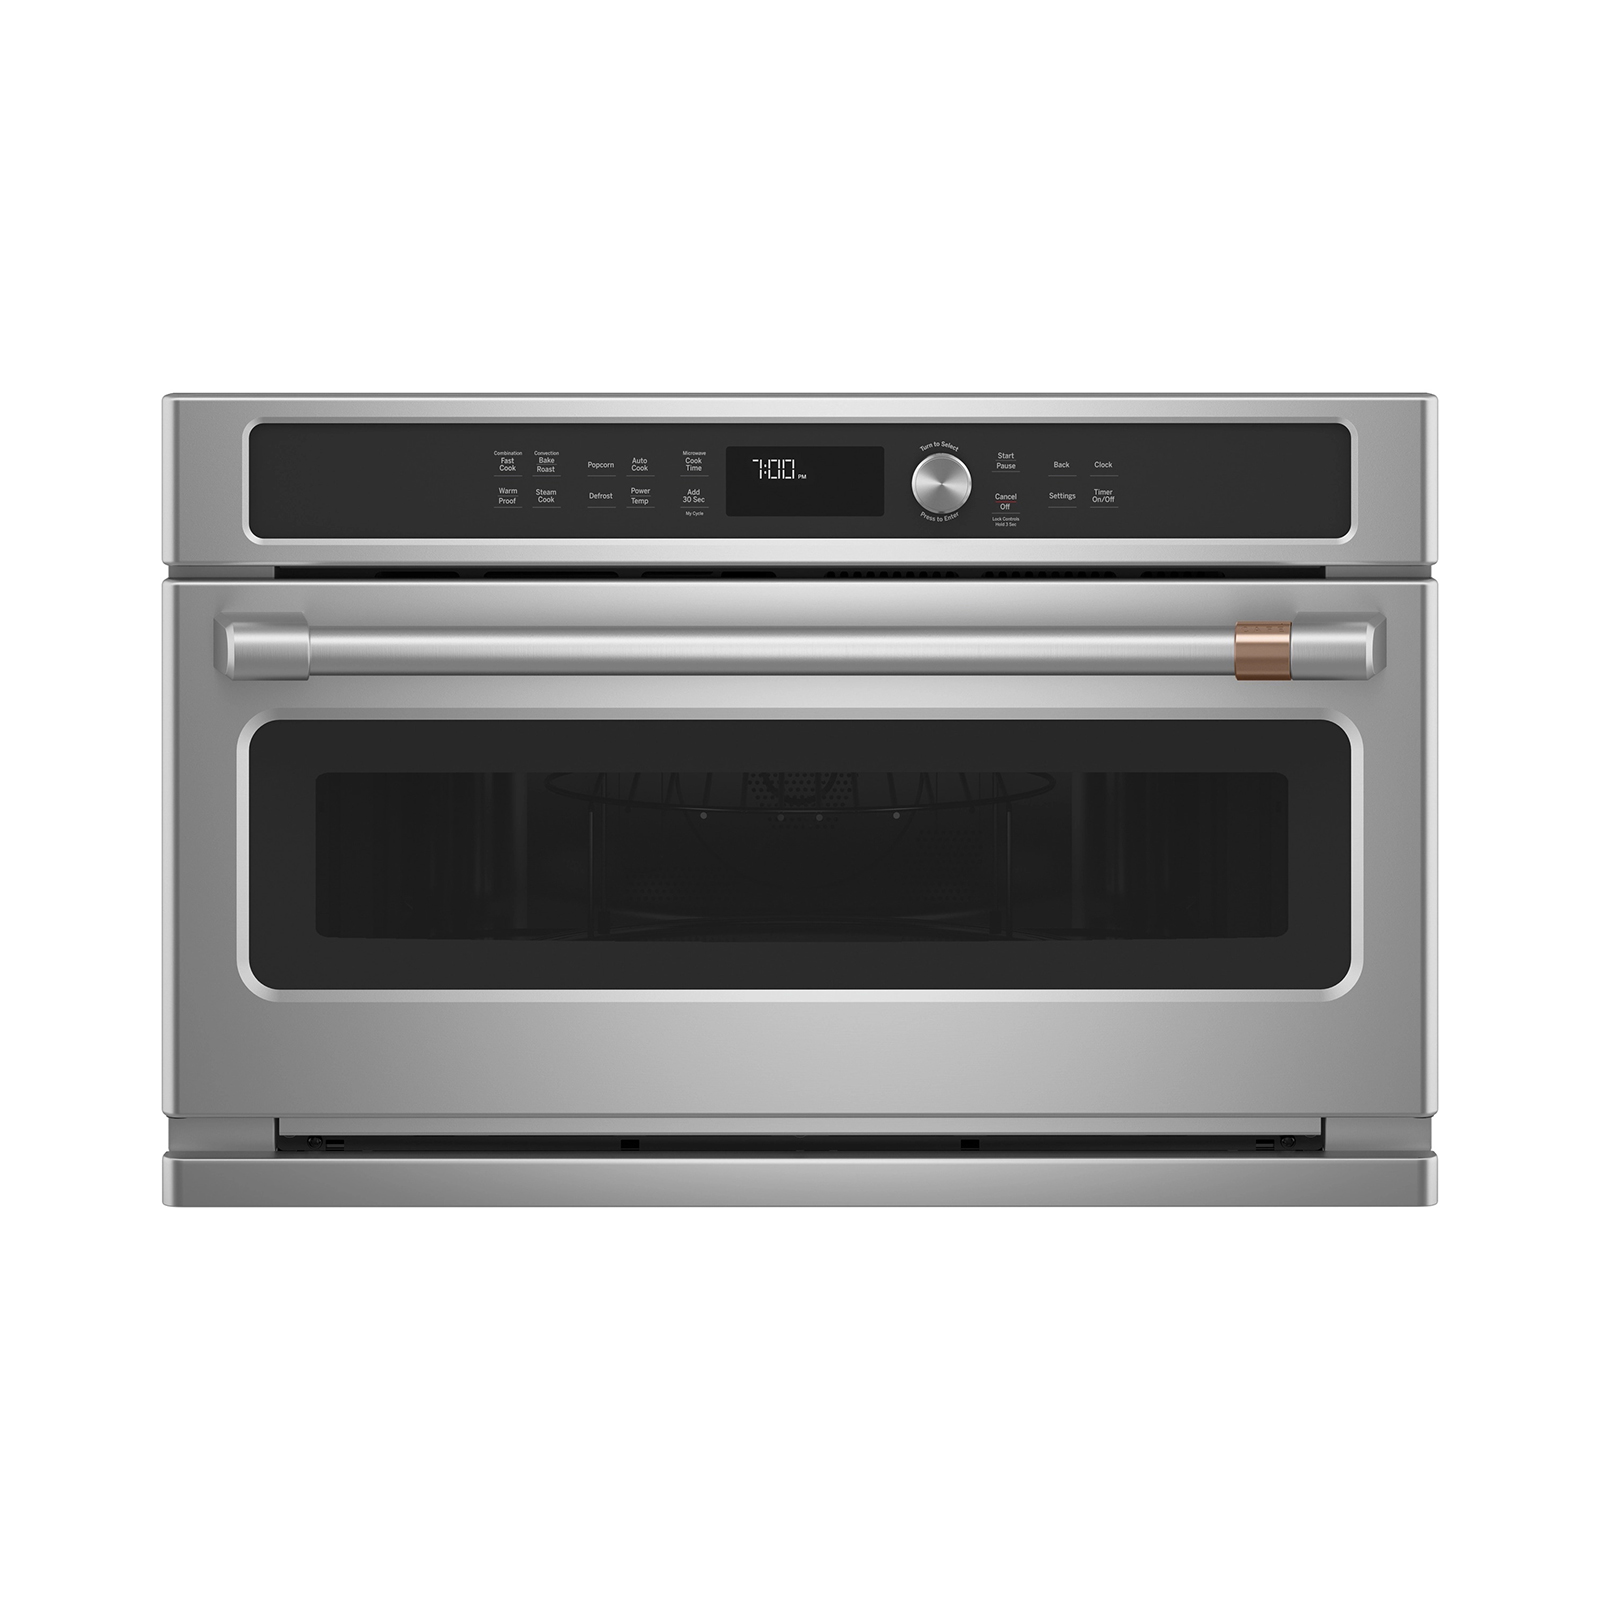 CAFE CWB713P2NS1 30" Built-In Microwave Convection Oven - Stainless Steel